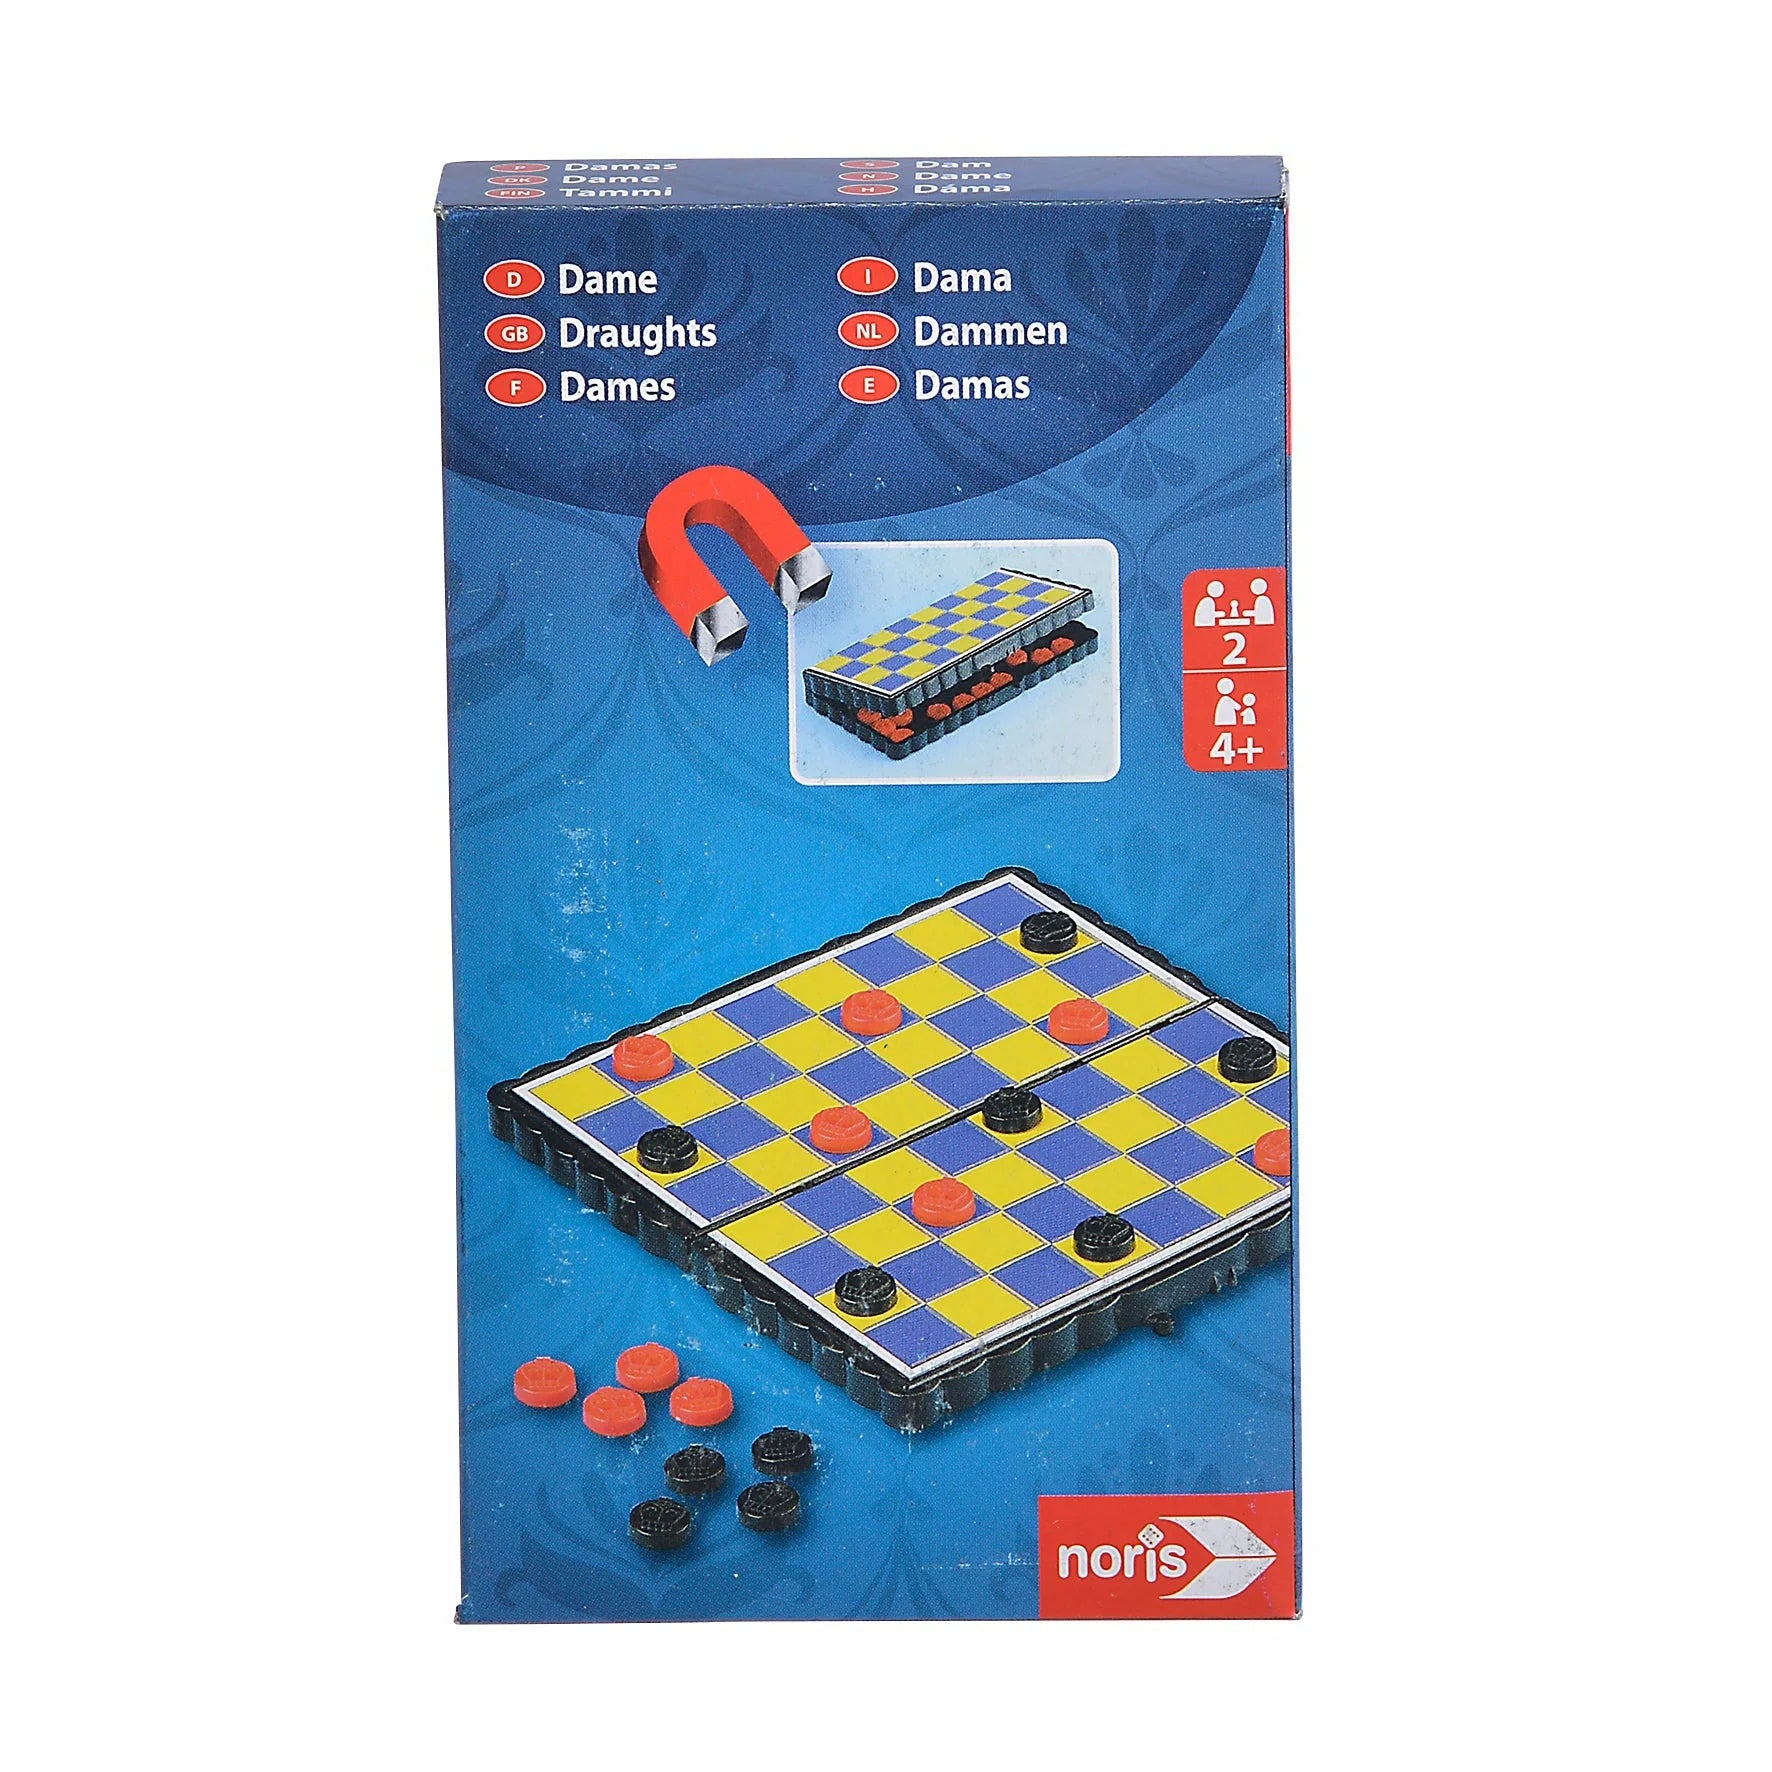 Magnetic Travel Games Assorted